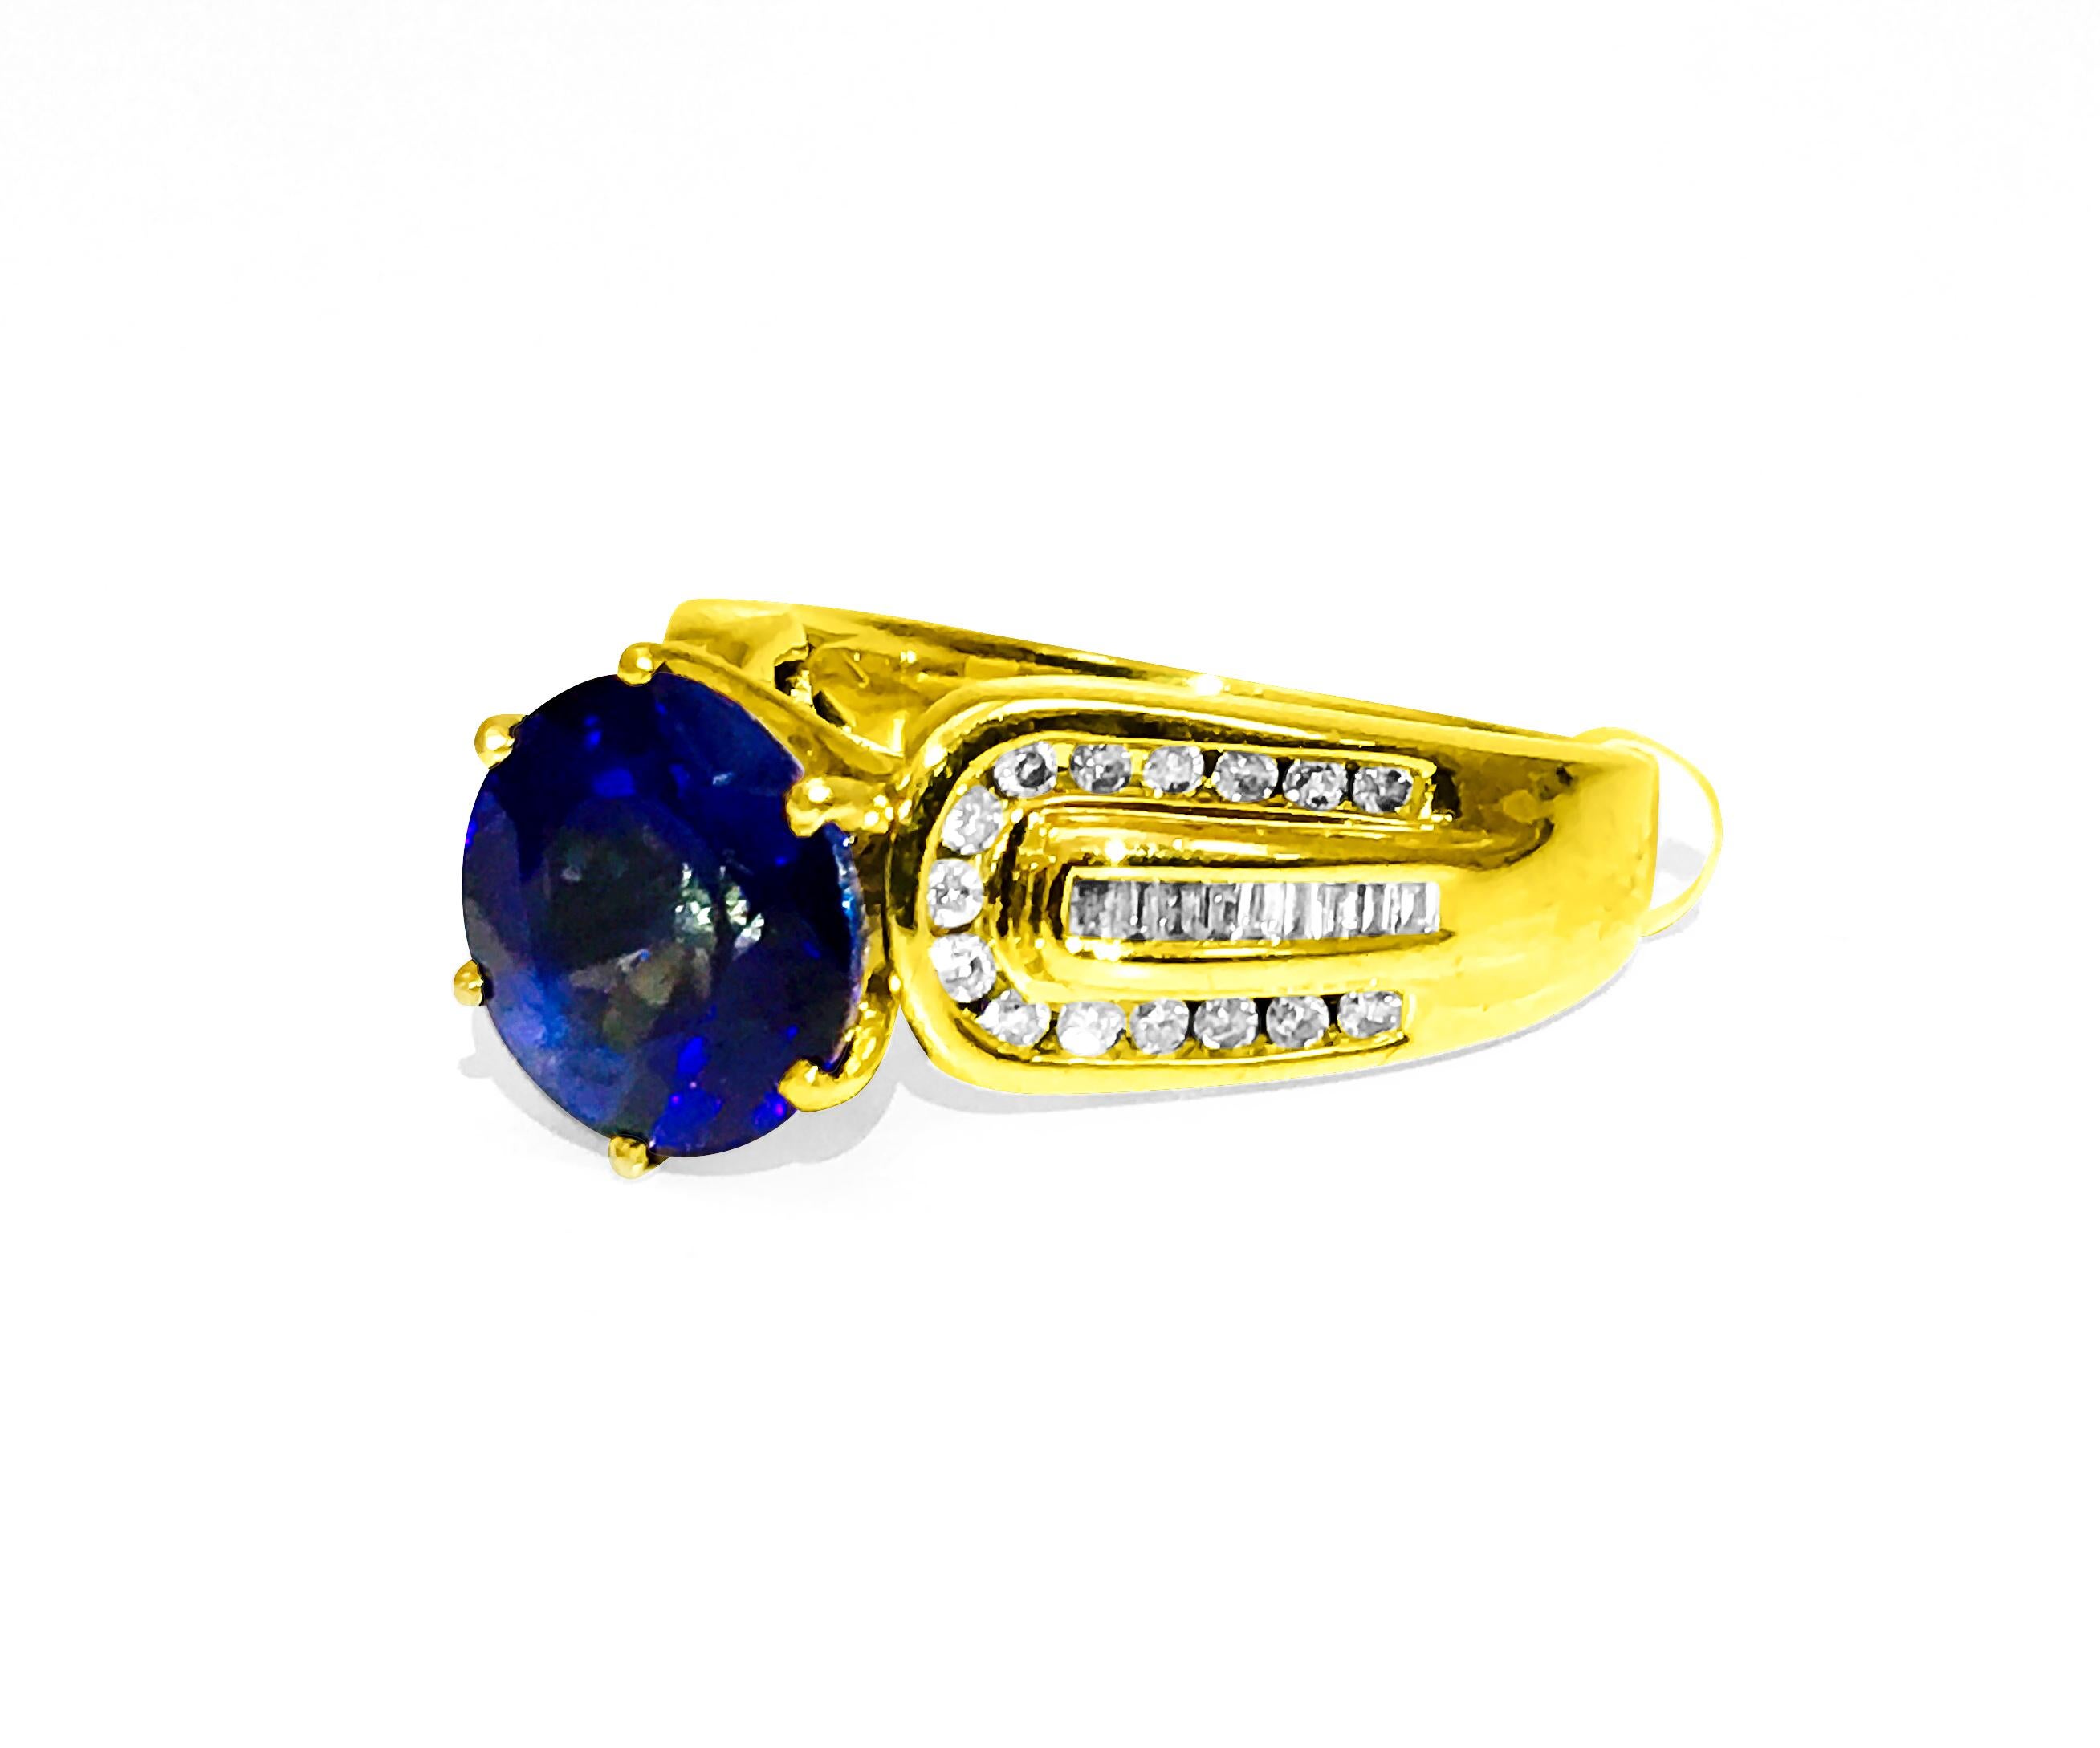 Elevate your style with our Vintage Blue Sapphire and Diamond Ring, crafted in 14K Yellow Gold. A mesmerizing 6.00-carat natural earth-mined blue sapphire steals the spotlight, complemented by 1.00 carat total round brilliant and baguette cut